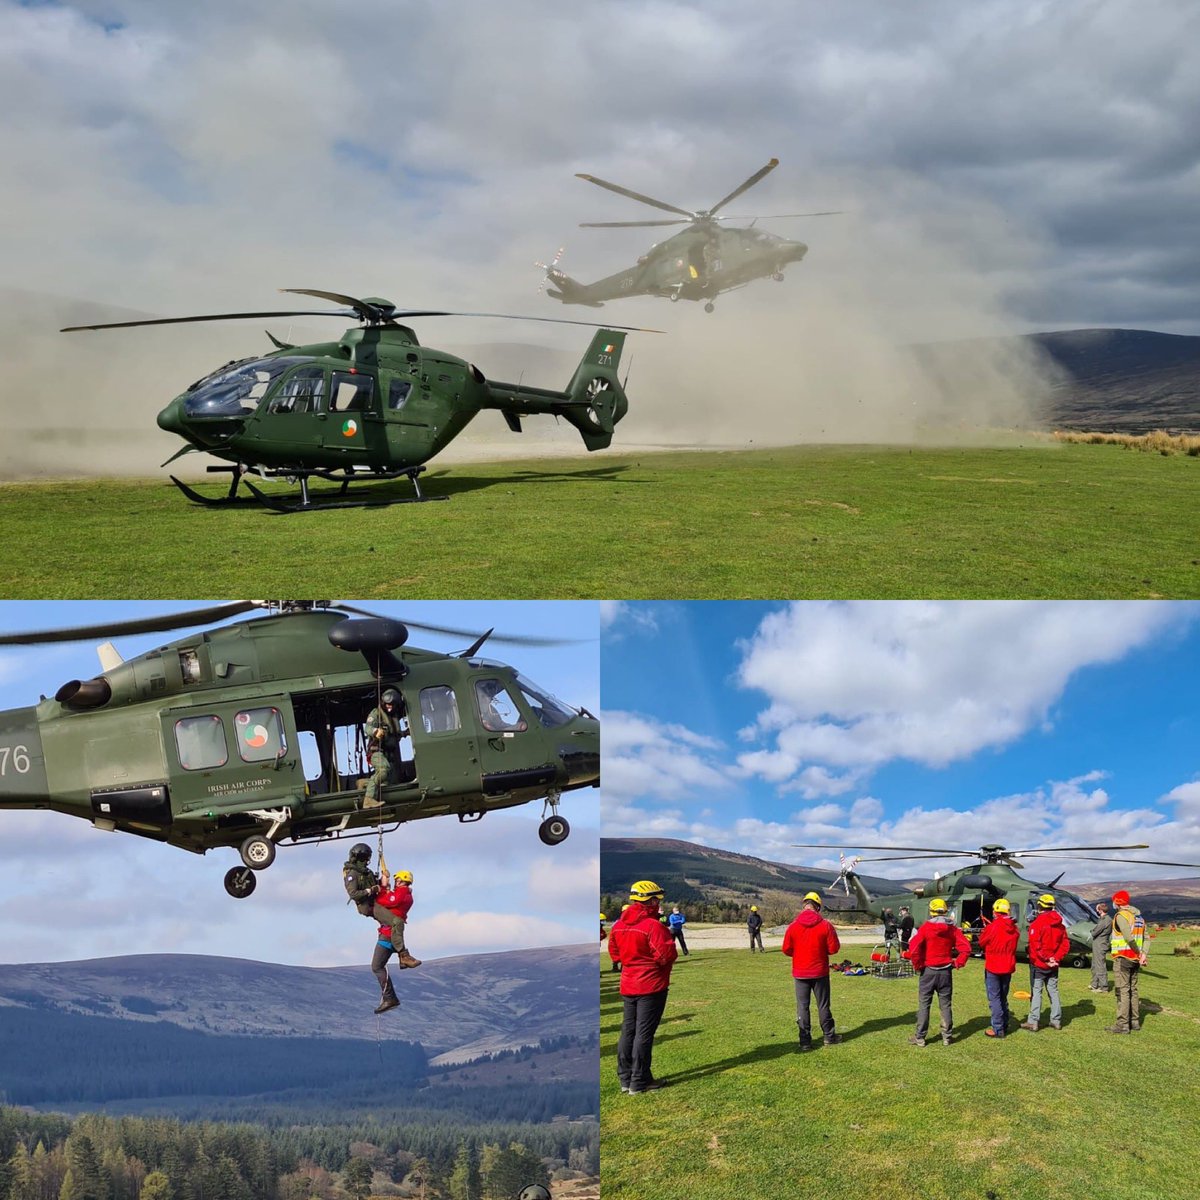 Thanks to @GlenofImaalMRT for joining us in a #moutainrescue training exercise. #301Sqn and #302Sqn joined to conduct exercises with the specialist teams, including #winching by day and by night using our #NVG capabilities.